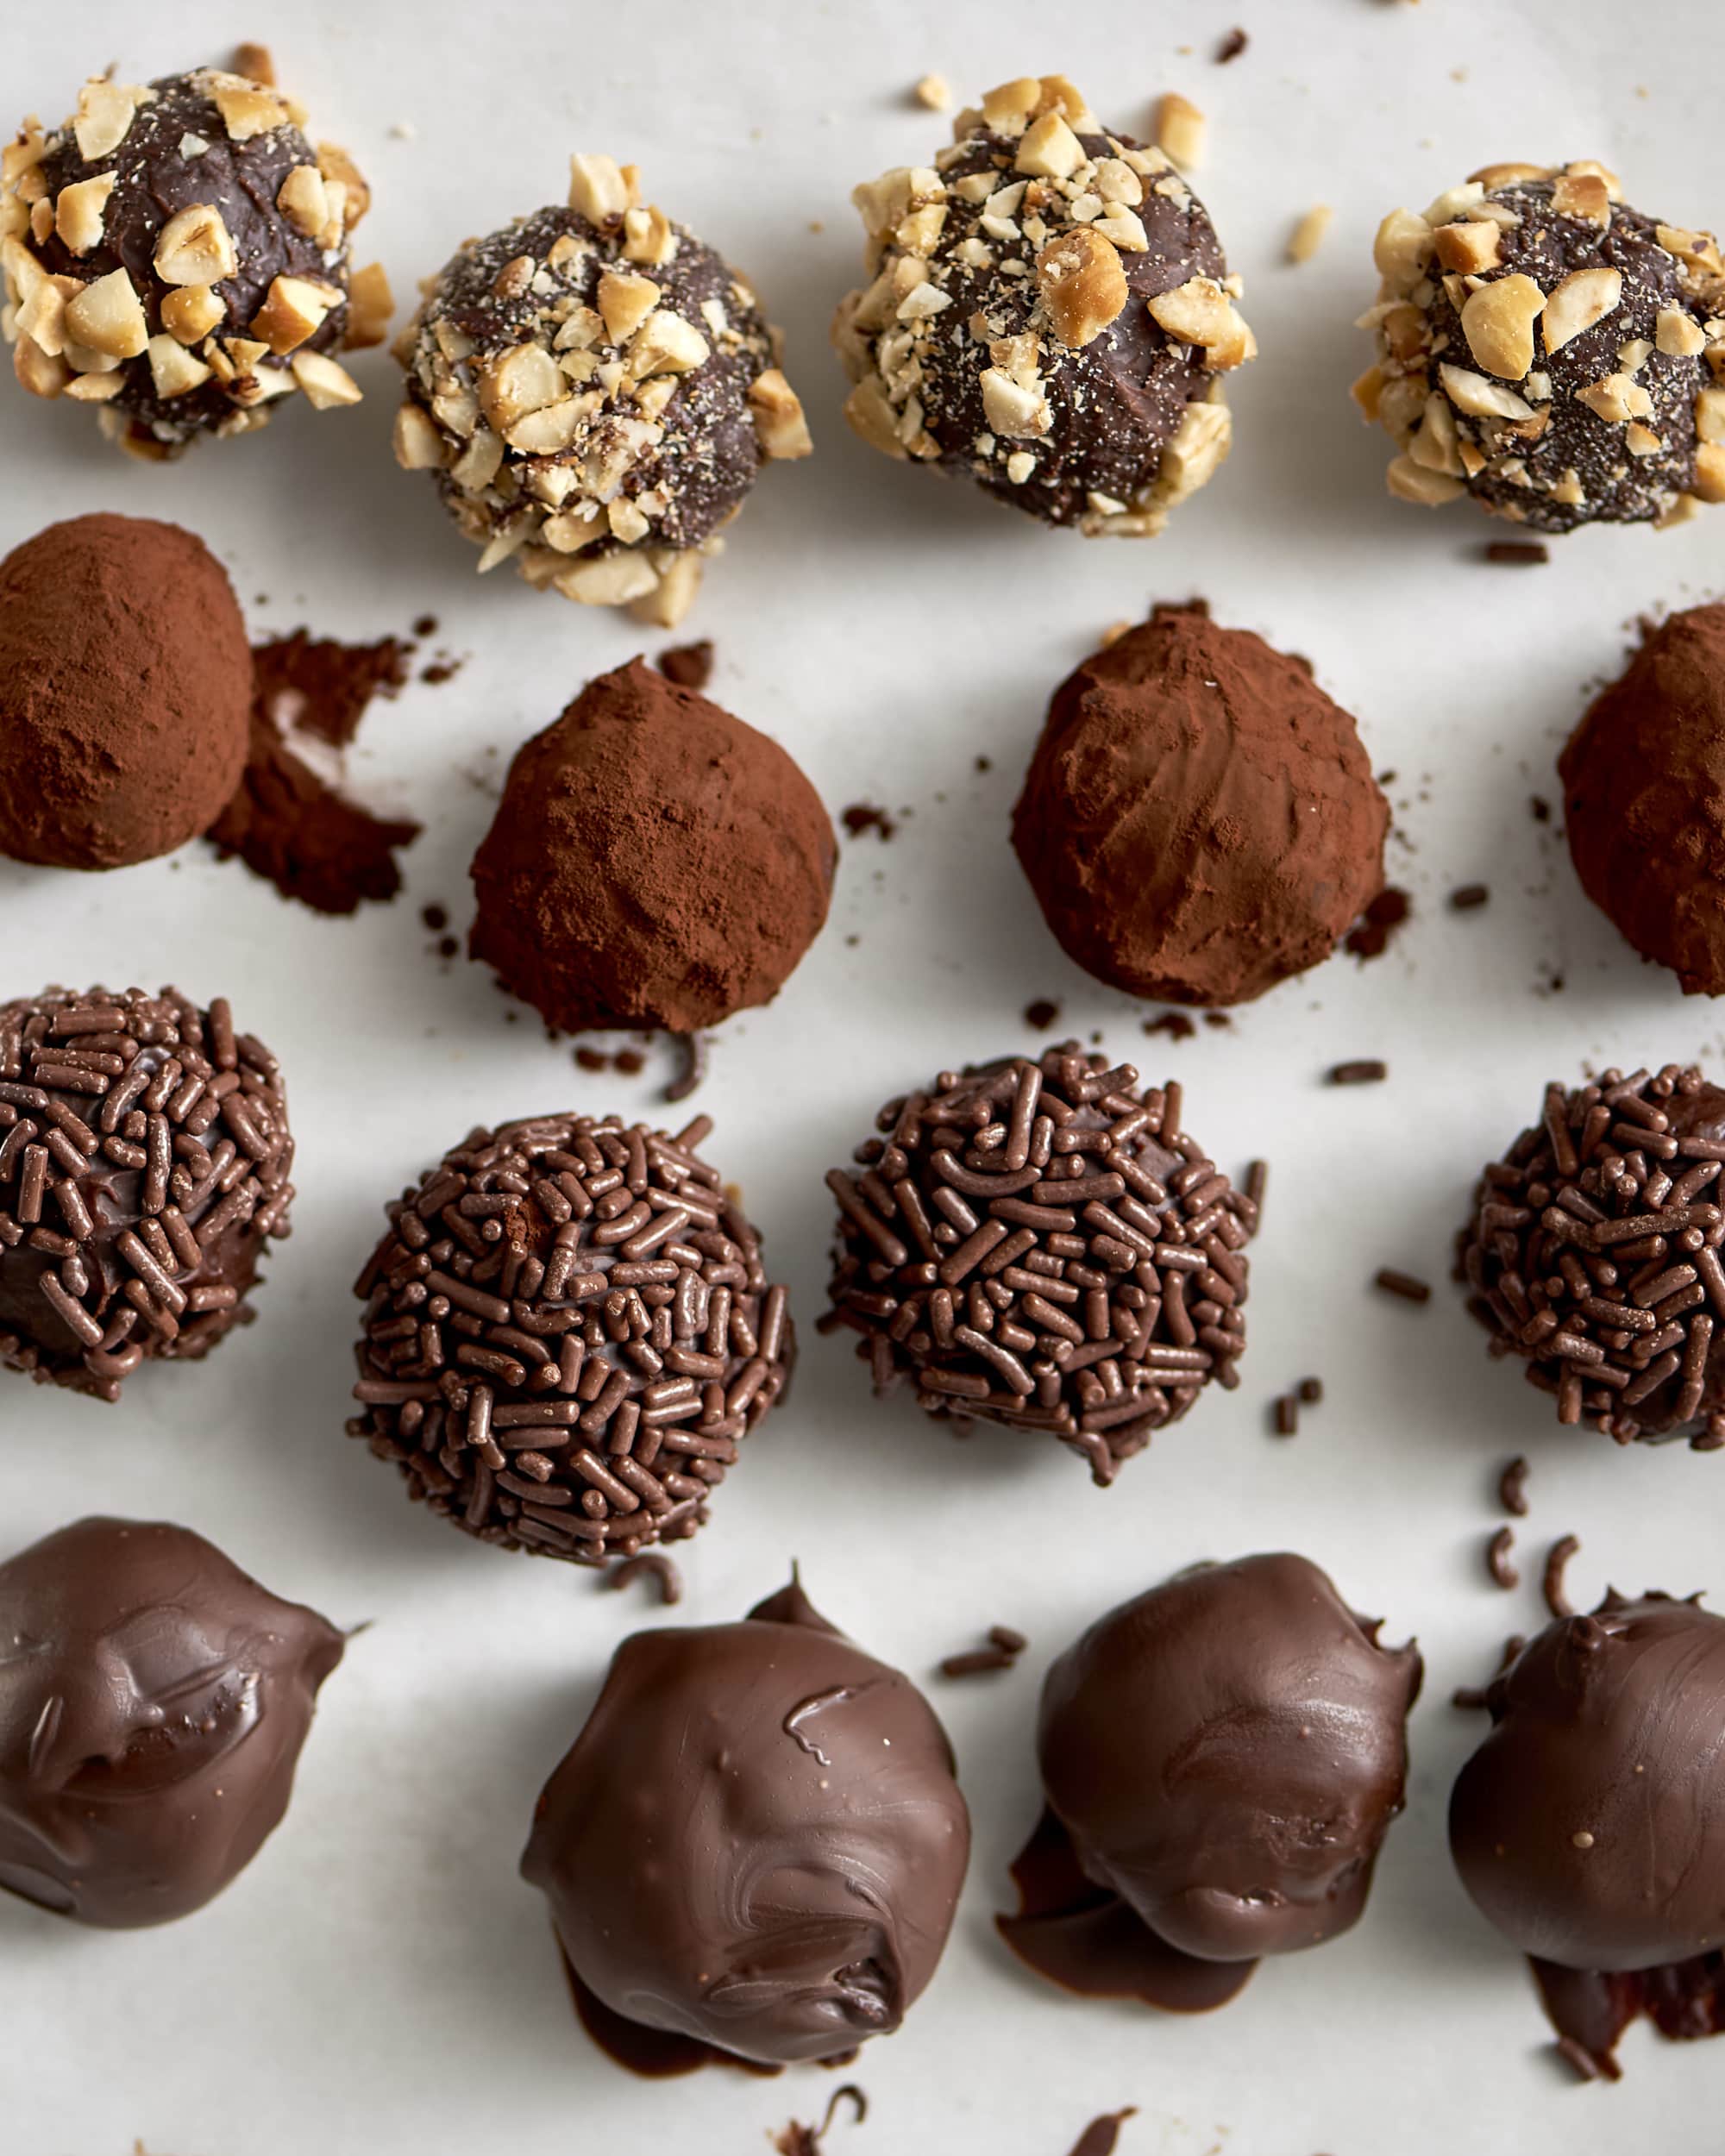 How To Make Simple, Foolproof Chocolate Truffles | Kitchn